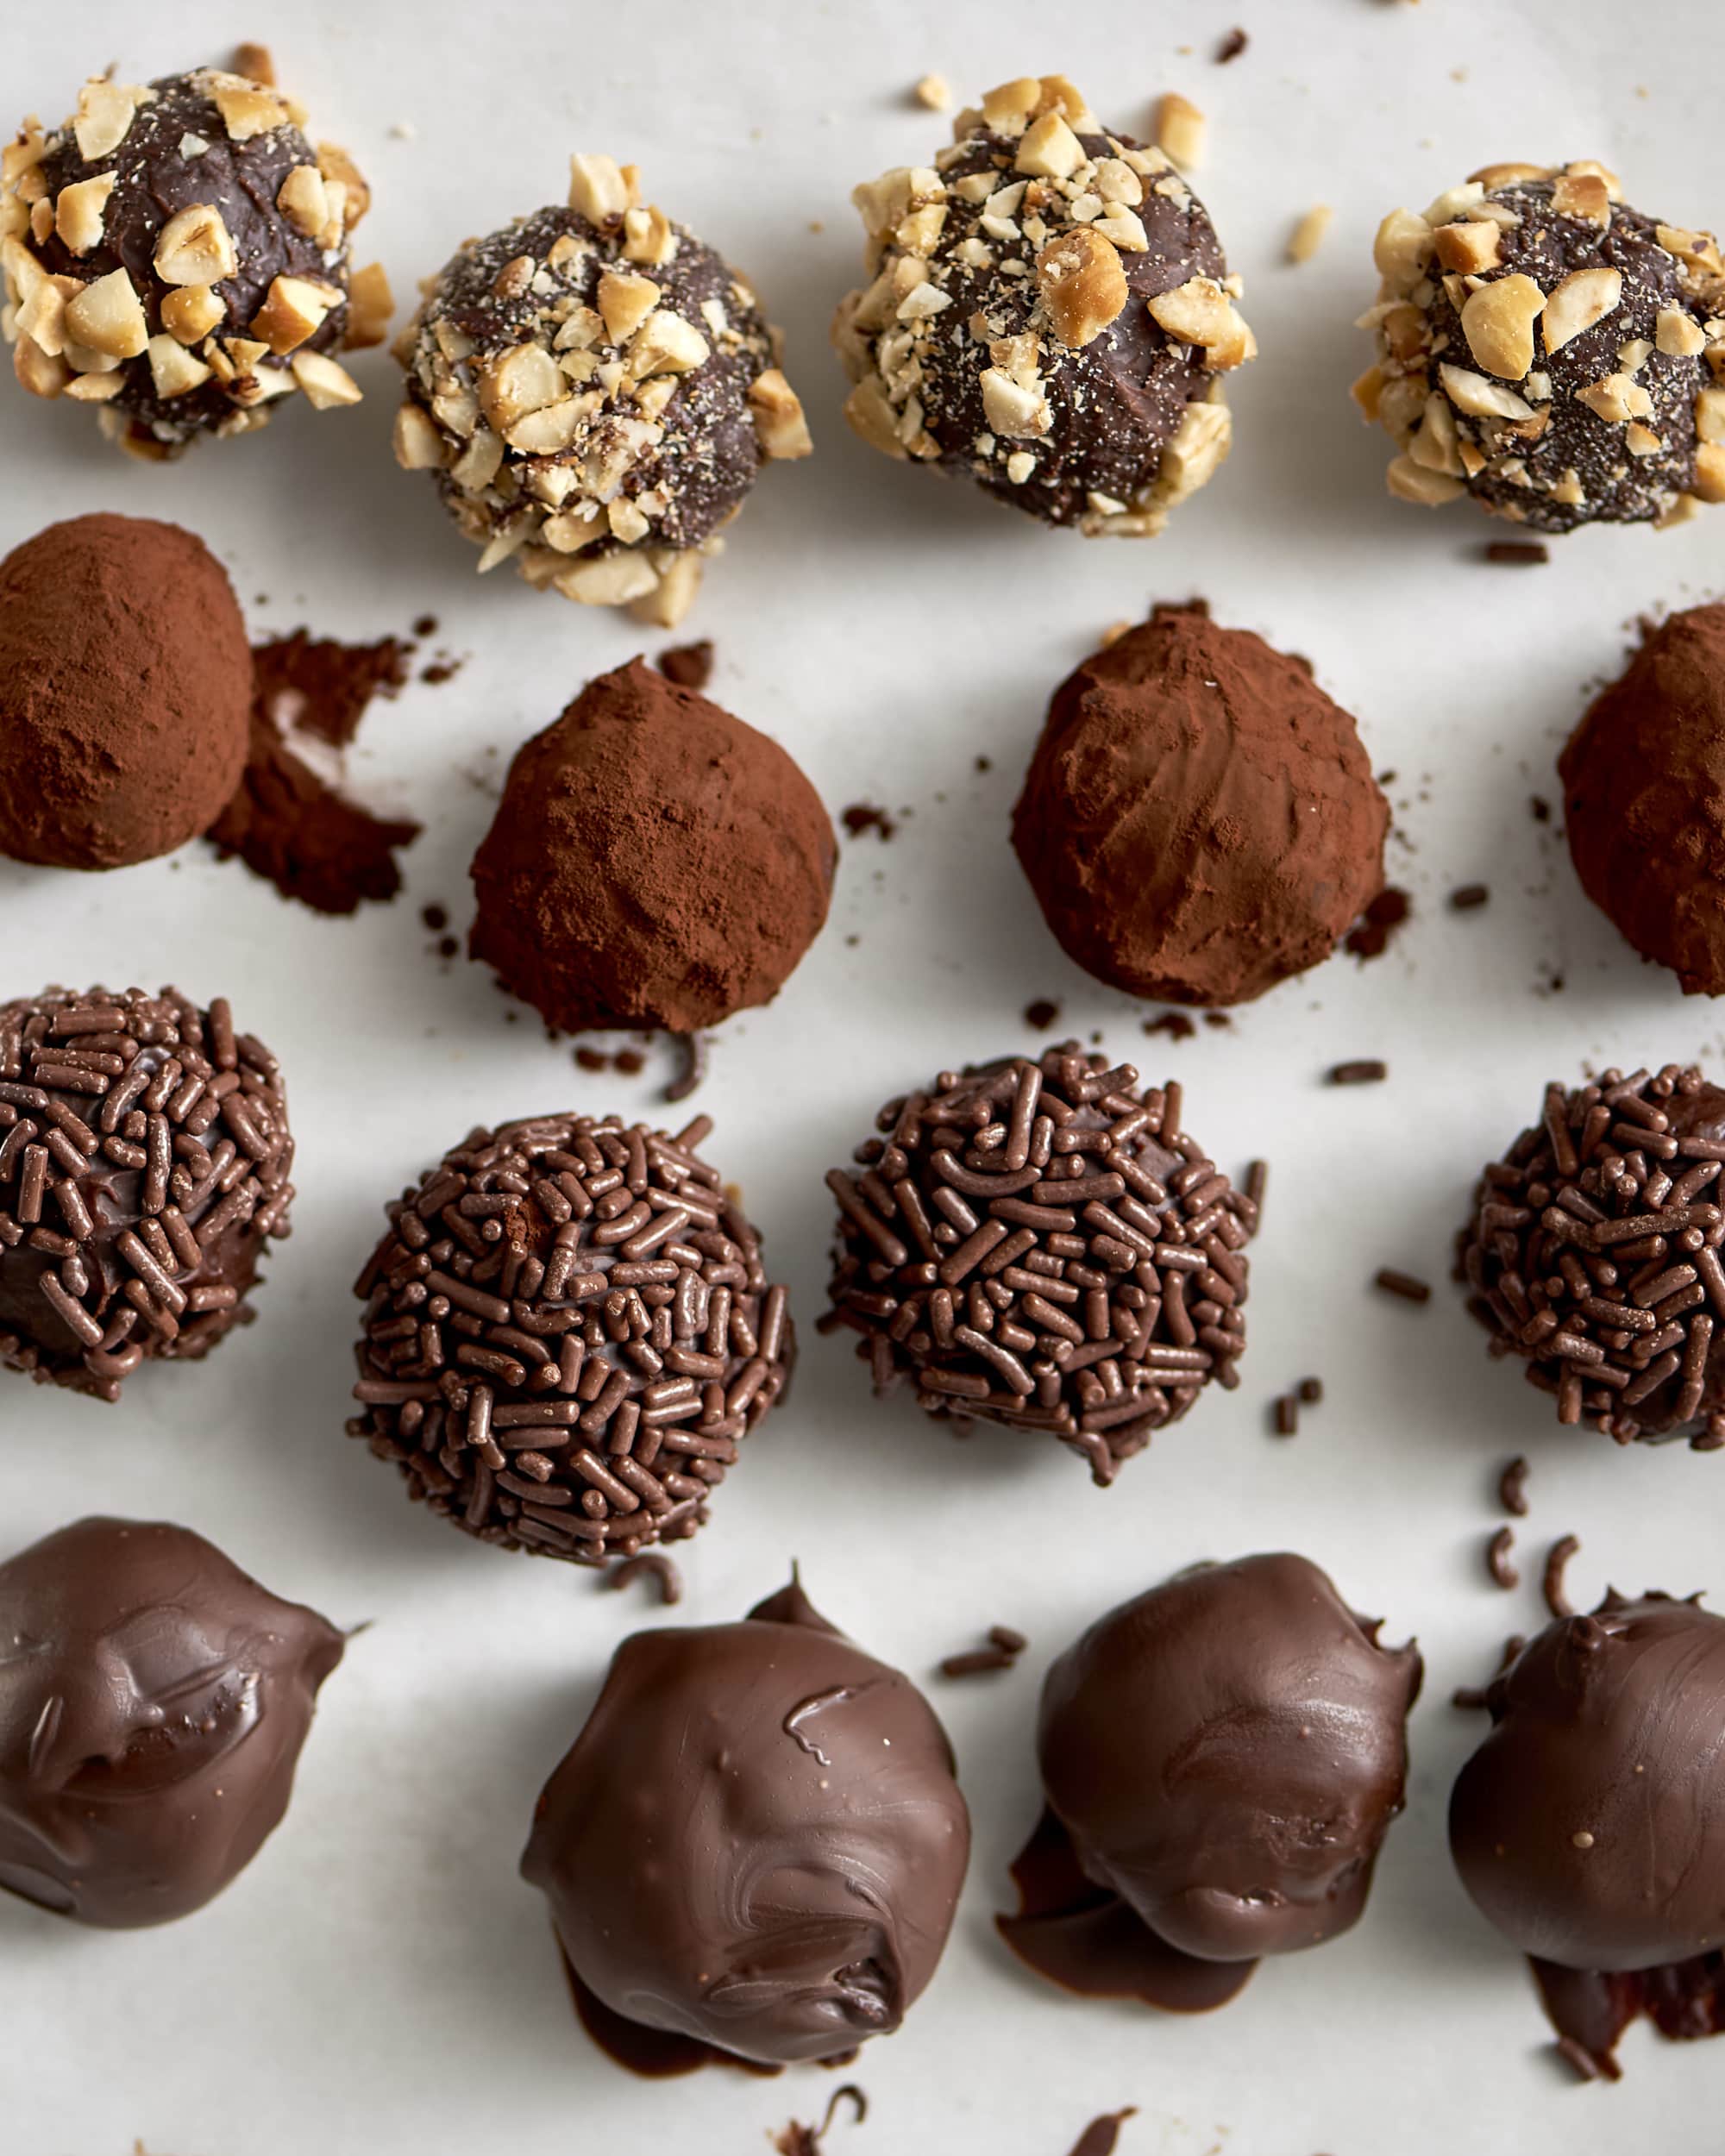 How To Make Simple, Foolproof Chocolate Truffles | Kitchn